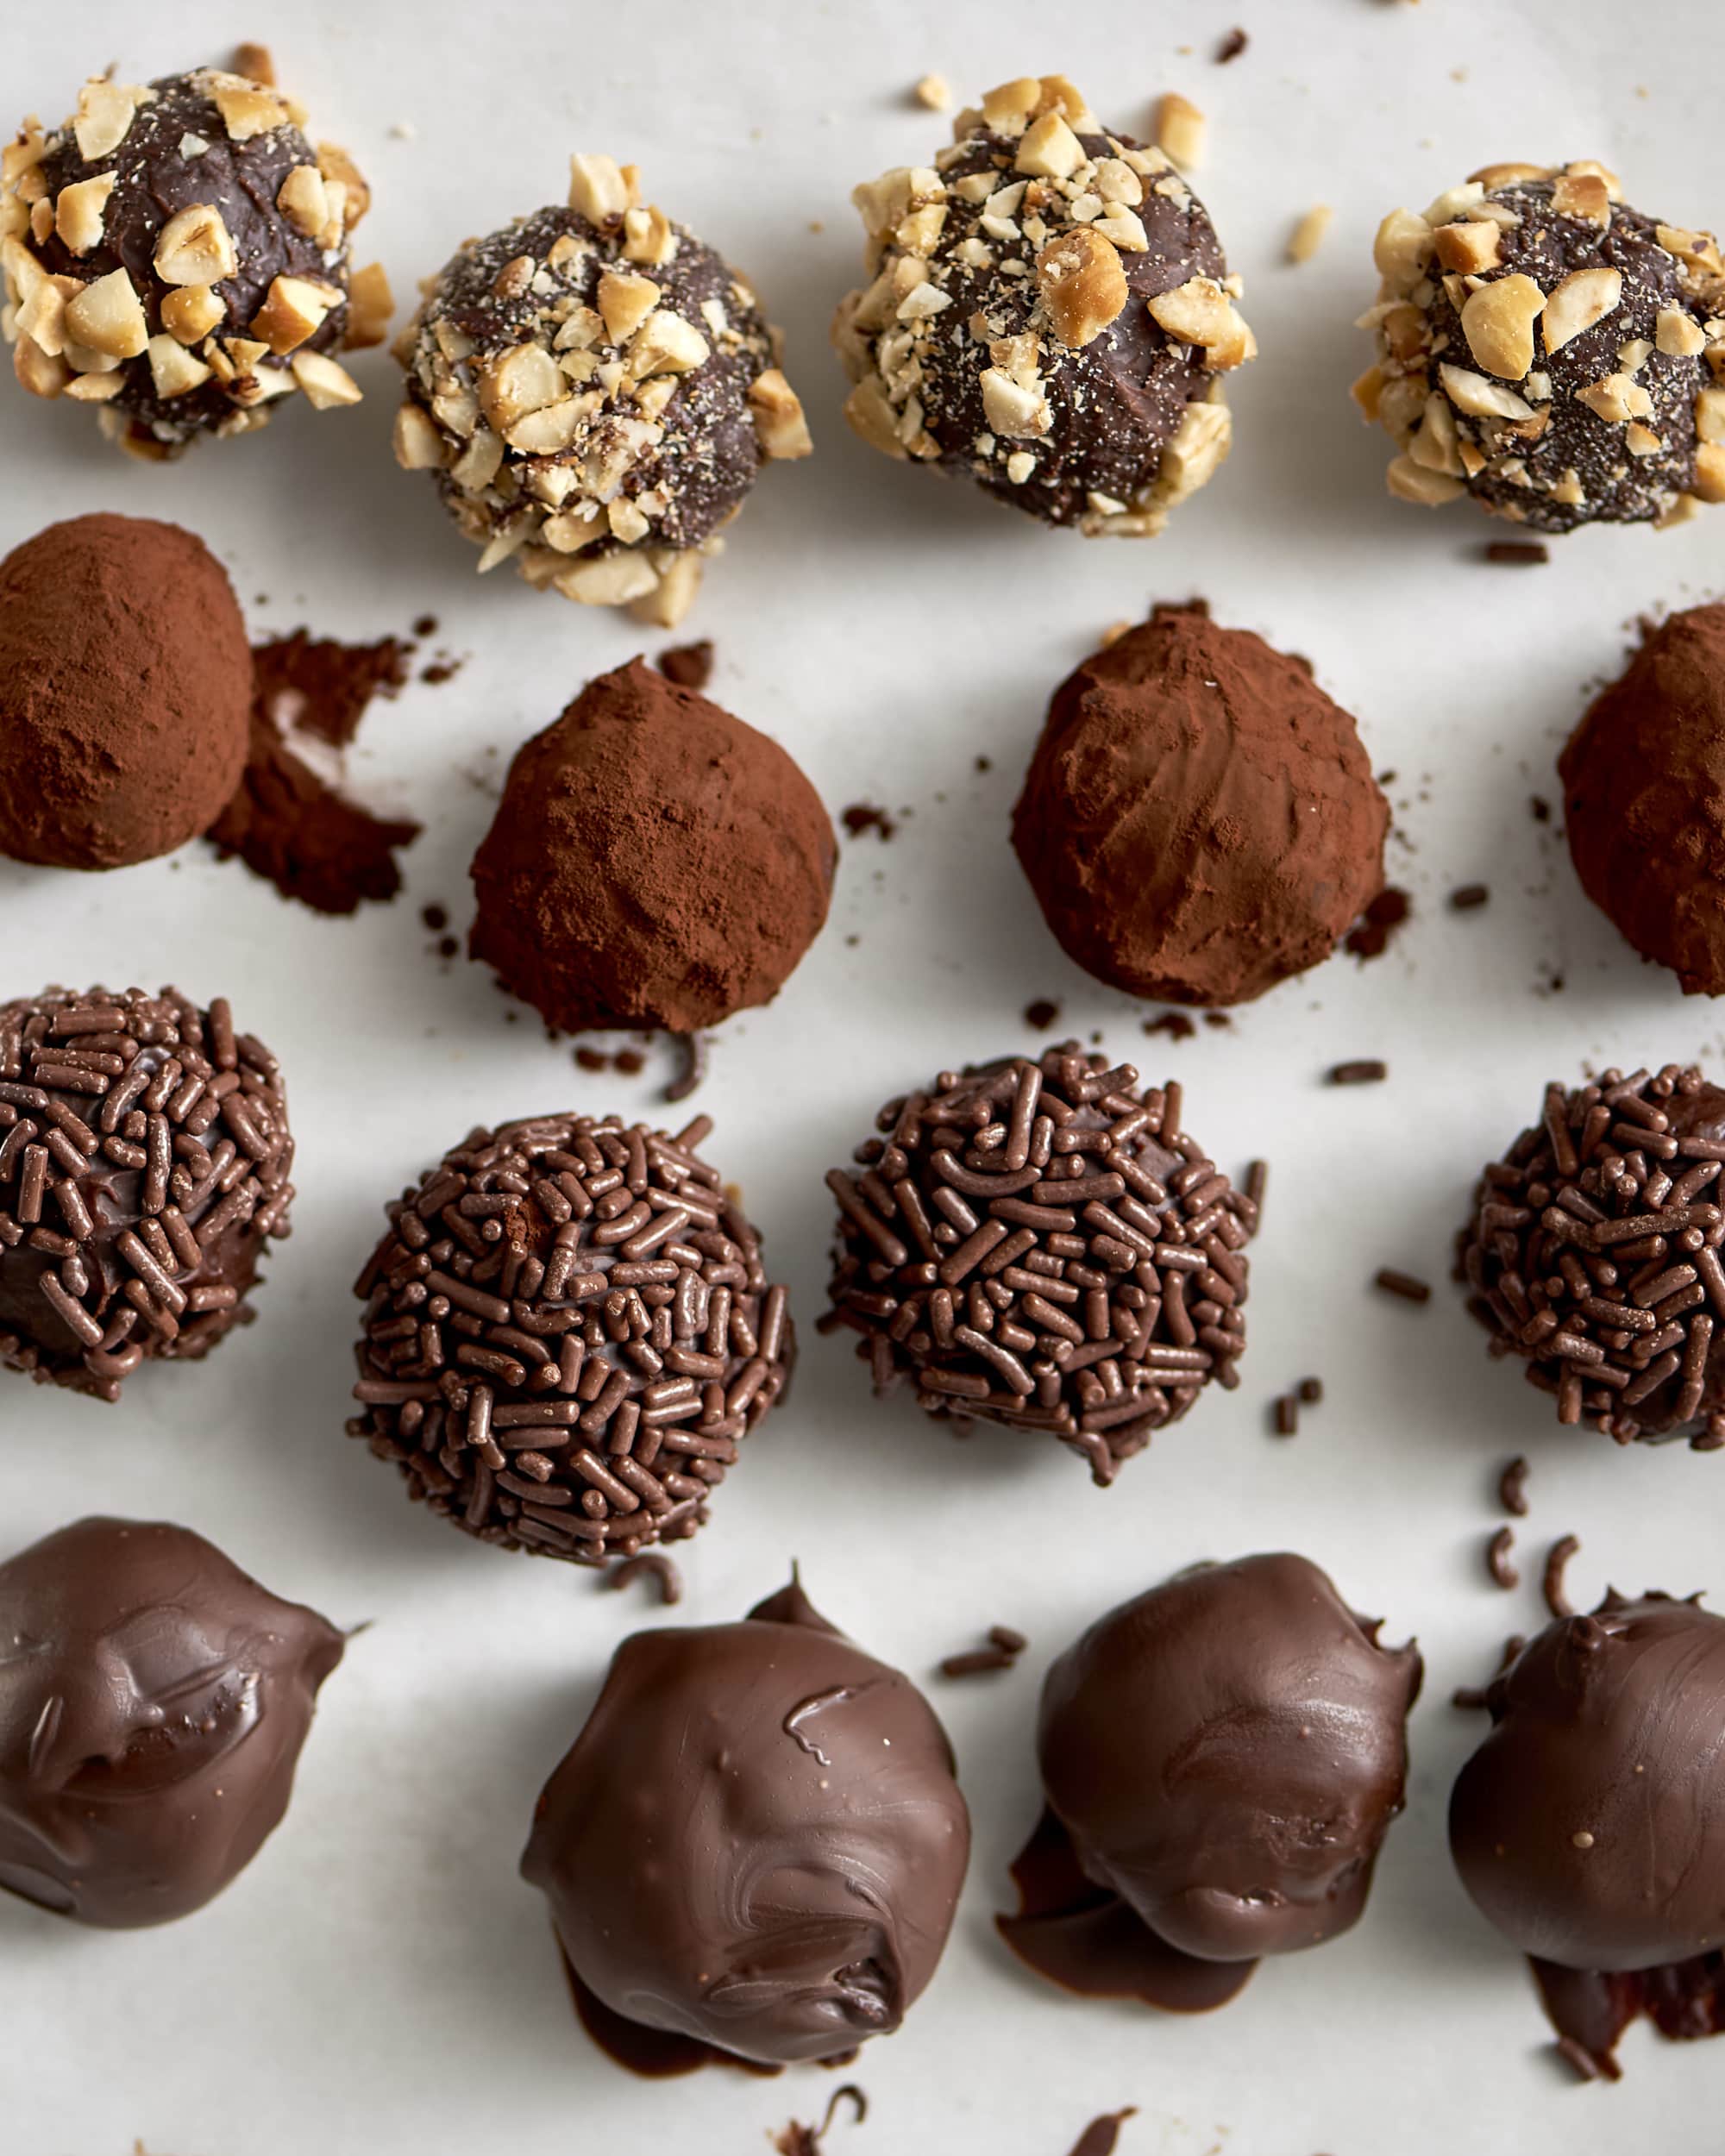 How To Make Simple, Foolproof Chocolate Truffles | Kitchn